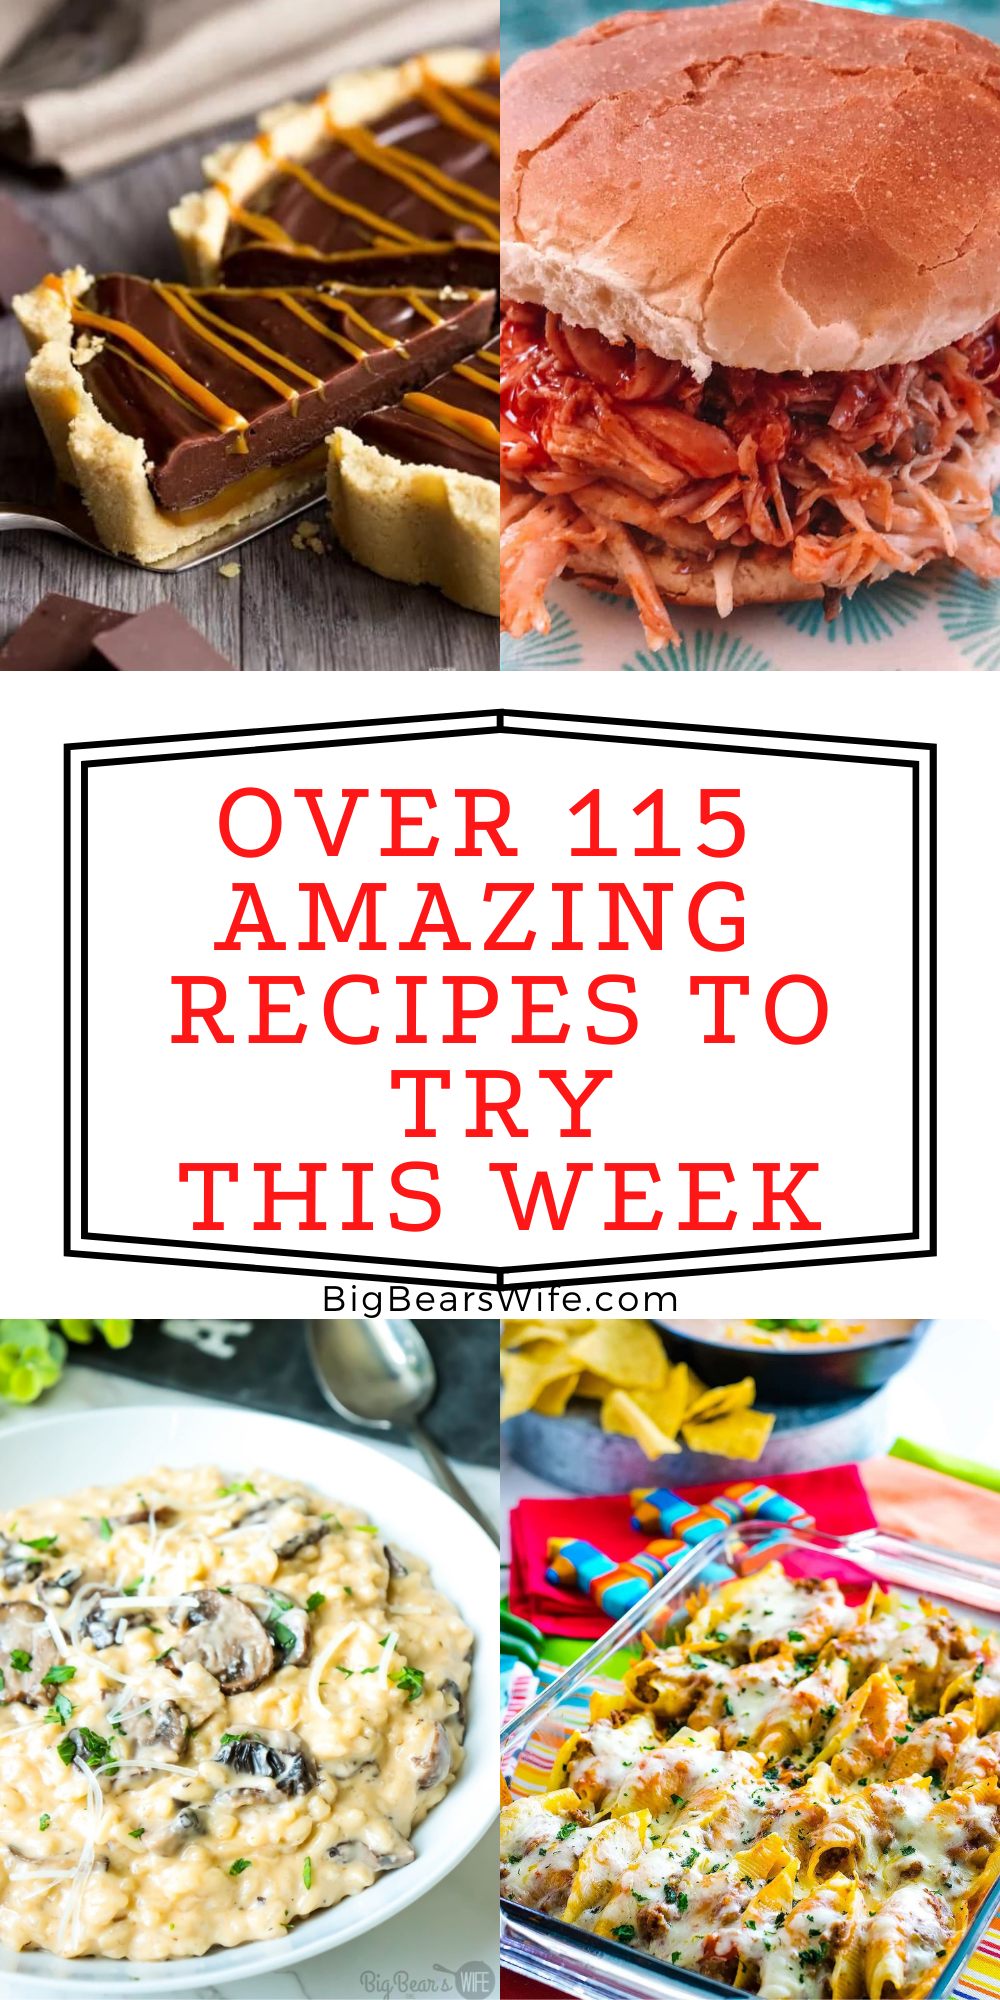 Welcome to Meal Plan Monday 265! We're featuring recipes like, Mexican Stuffed Shells, Slow Cooker Buffalo Chicken, Insanely Easy No Bake Caramel Chocolate Tart and Mushroom Risotto! via @bigbearswife